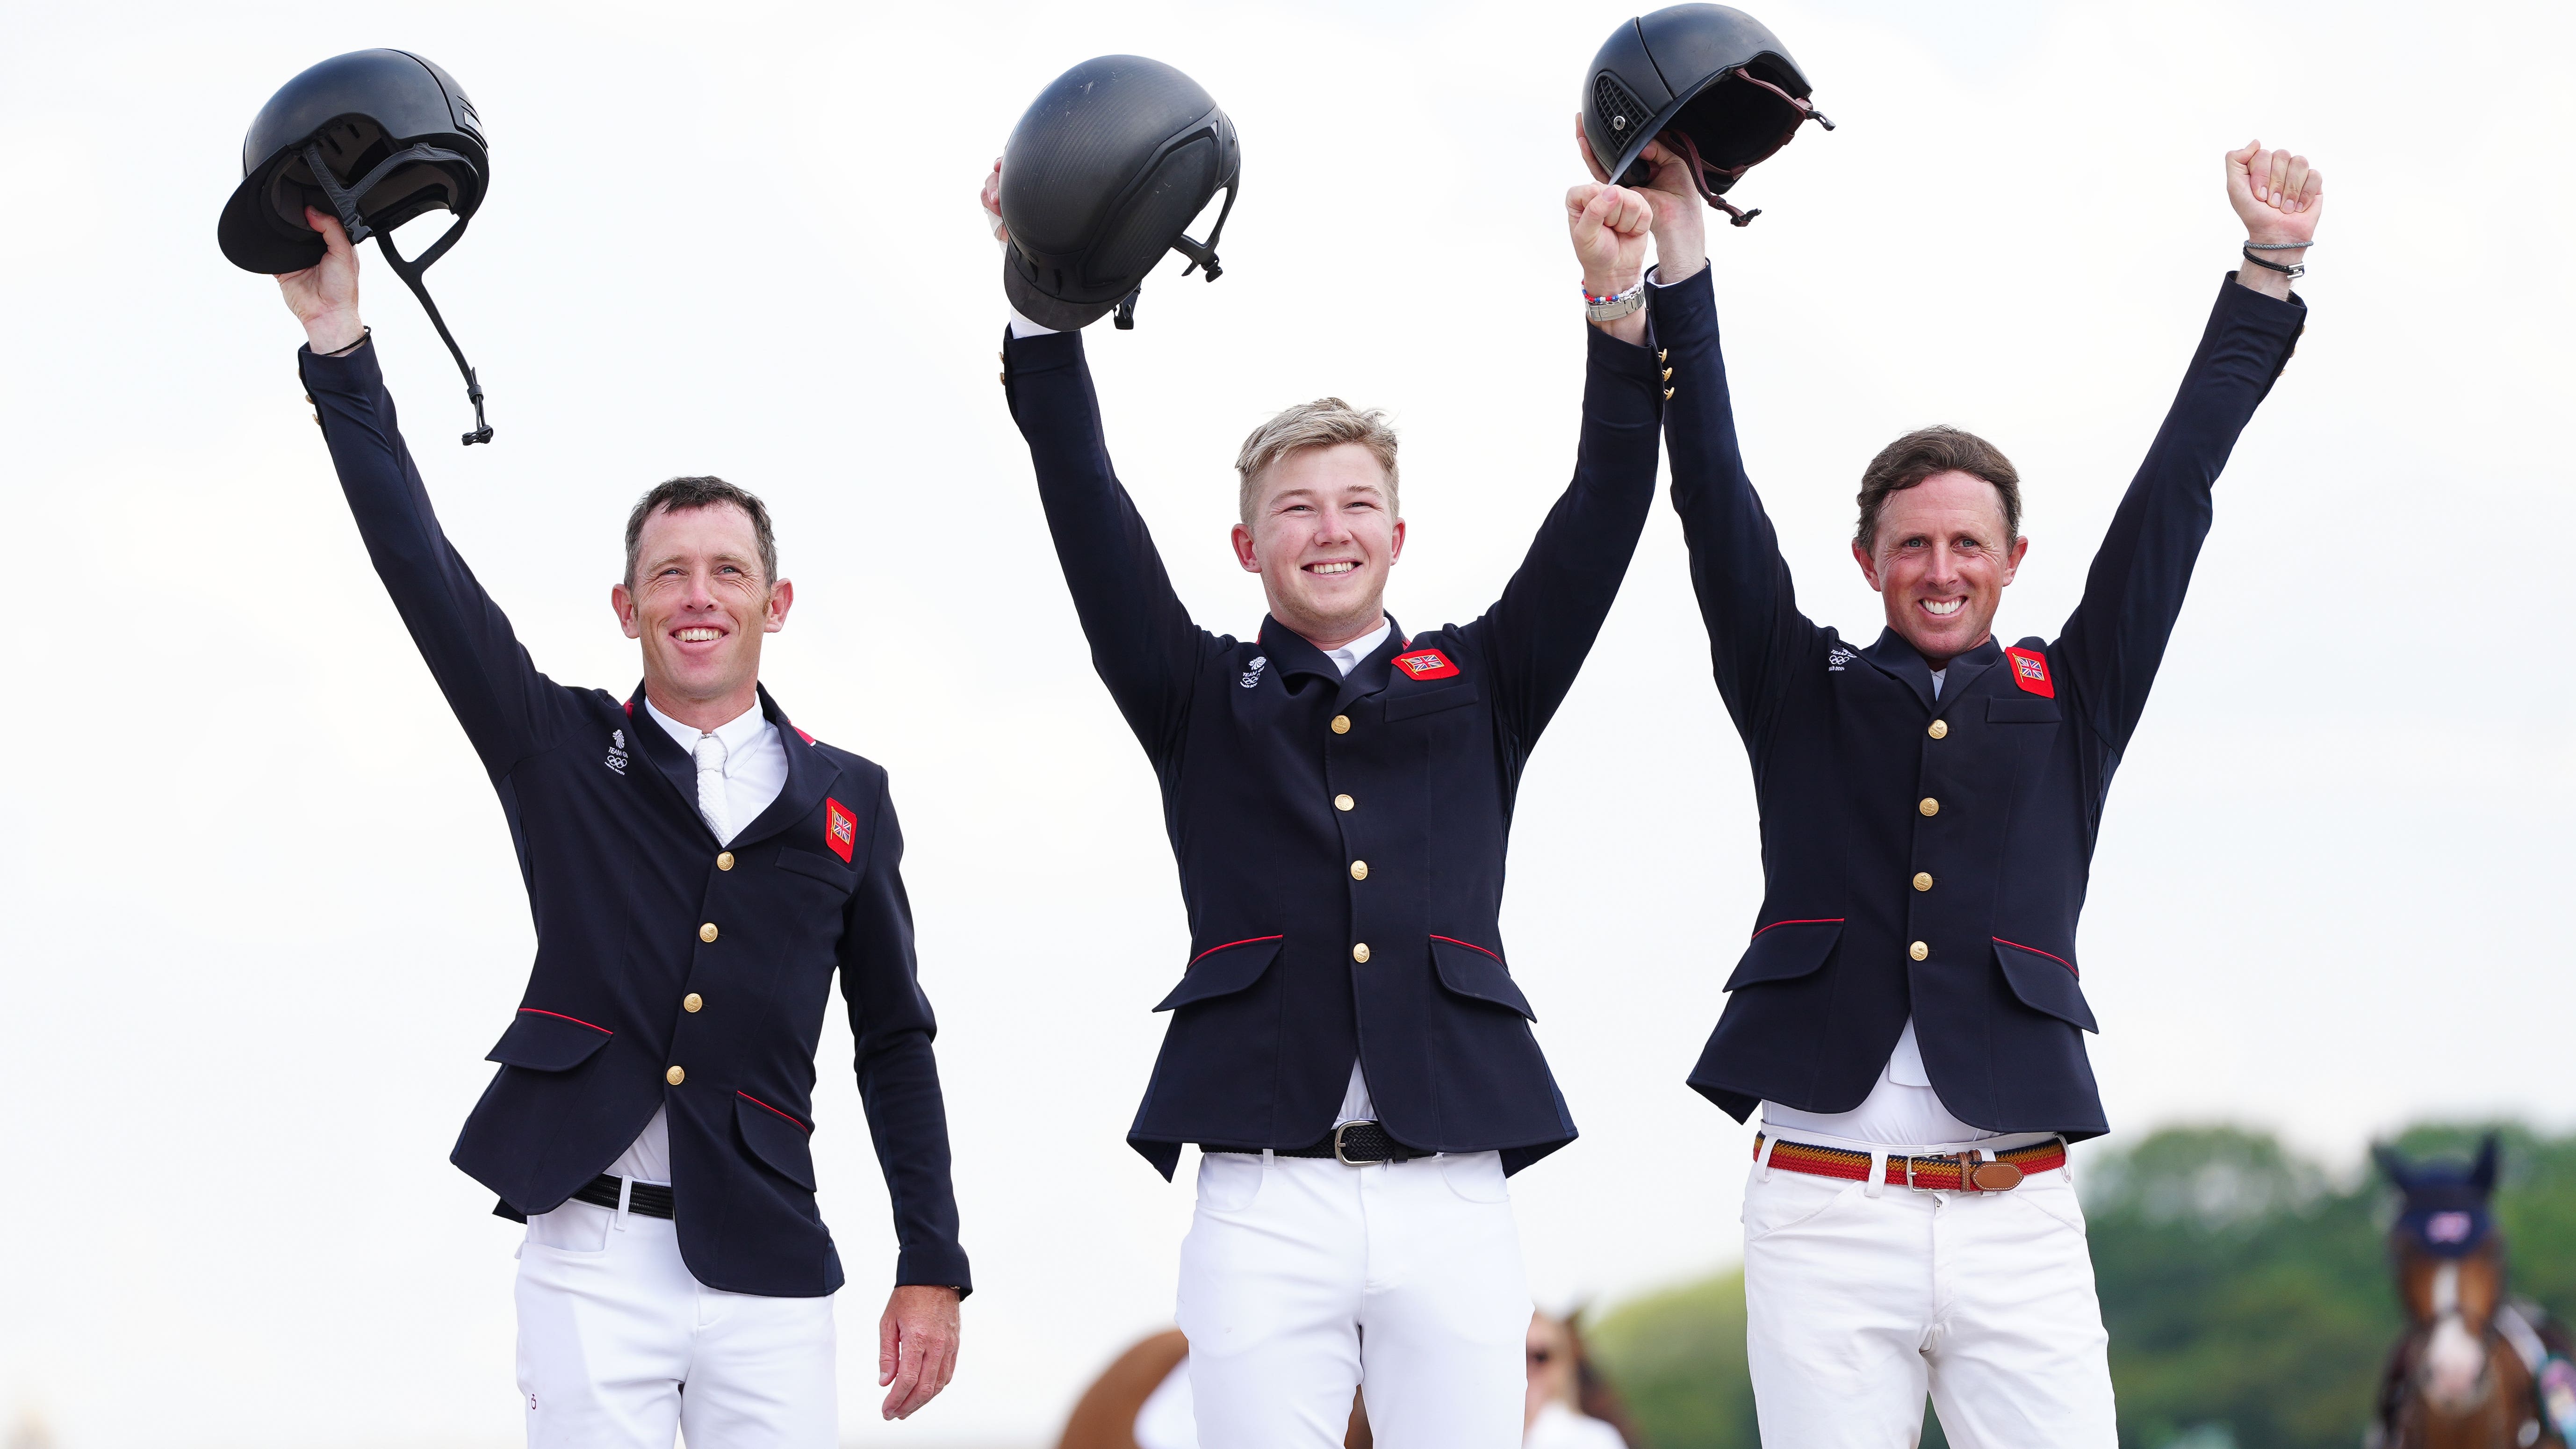 Scott Brash, Harry Charles and Ben Maher win jumping team gold for Great Britain